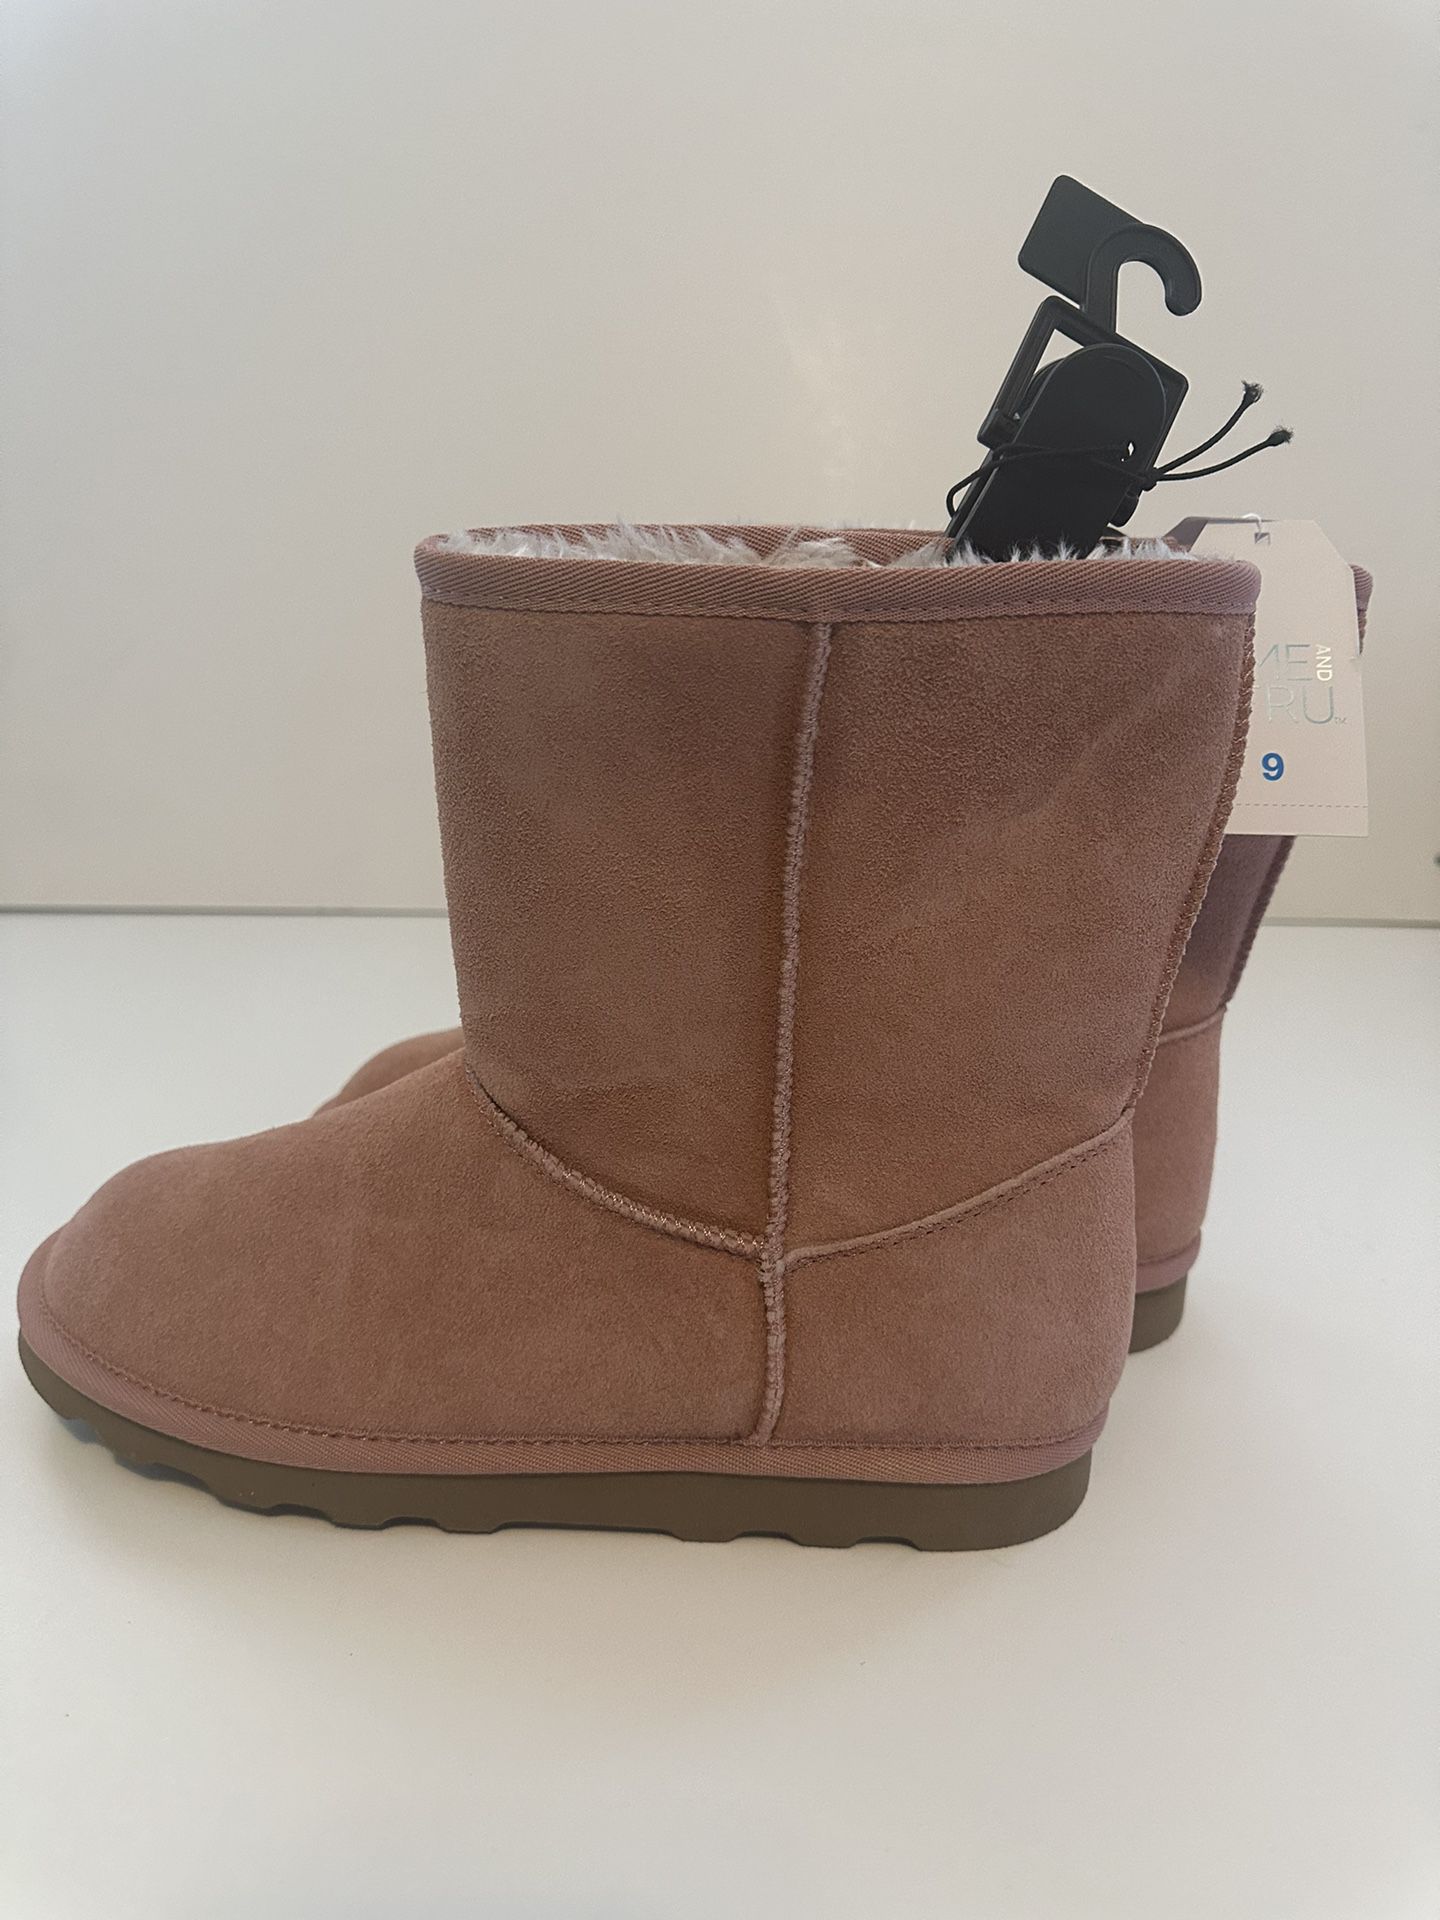 NEW - Women’s Boots Size 9 Pink 